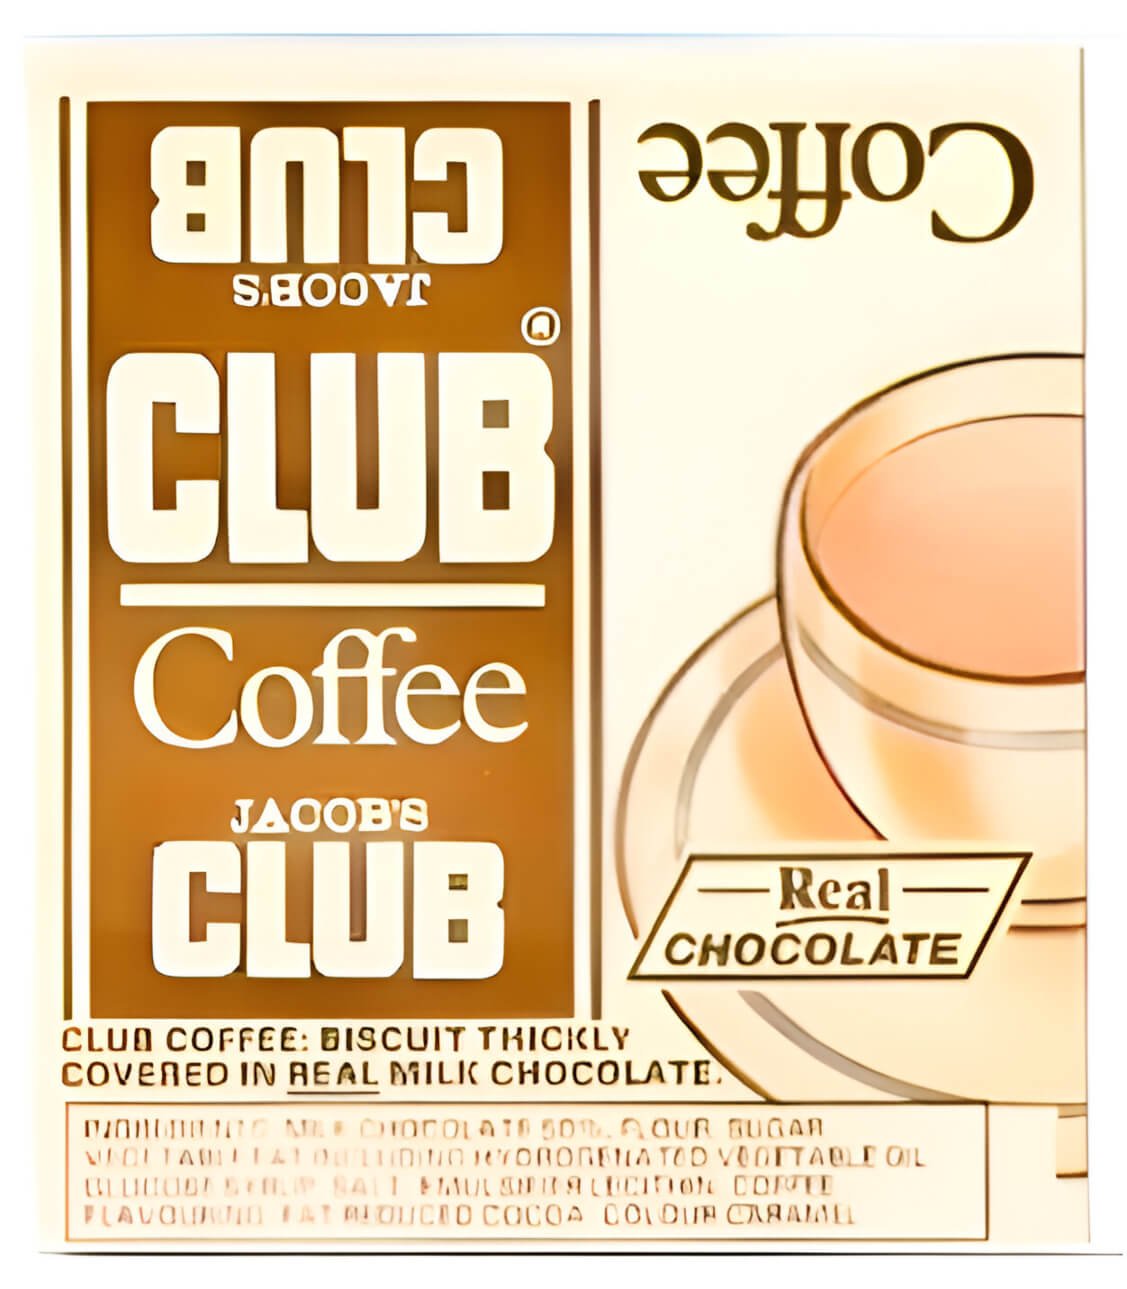 Club Coffee wrapper from the 1980s, brown and white with cup and saucer graphic